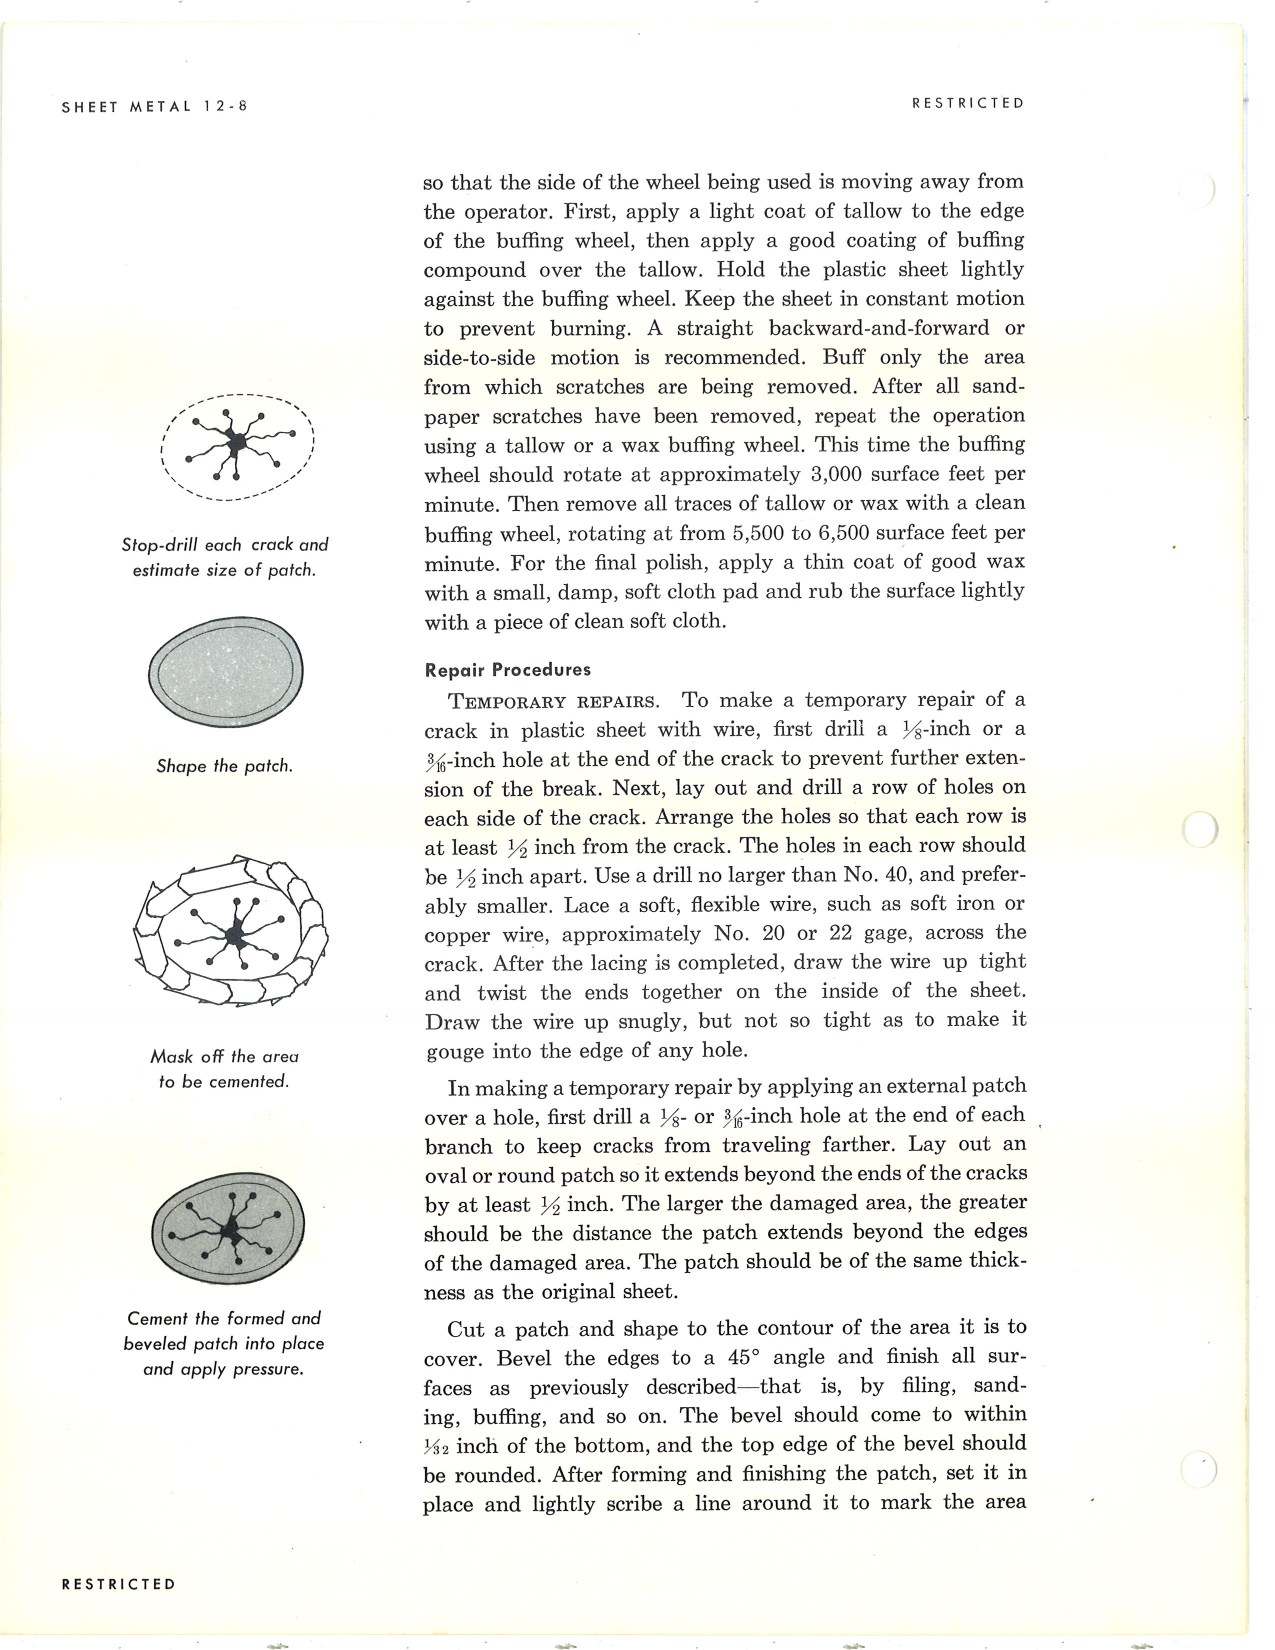 Sample page 204 from AirCorps Library document: Aircraft Sheet Metal Maintenance 